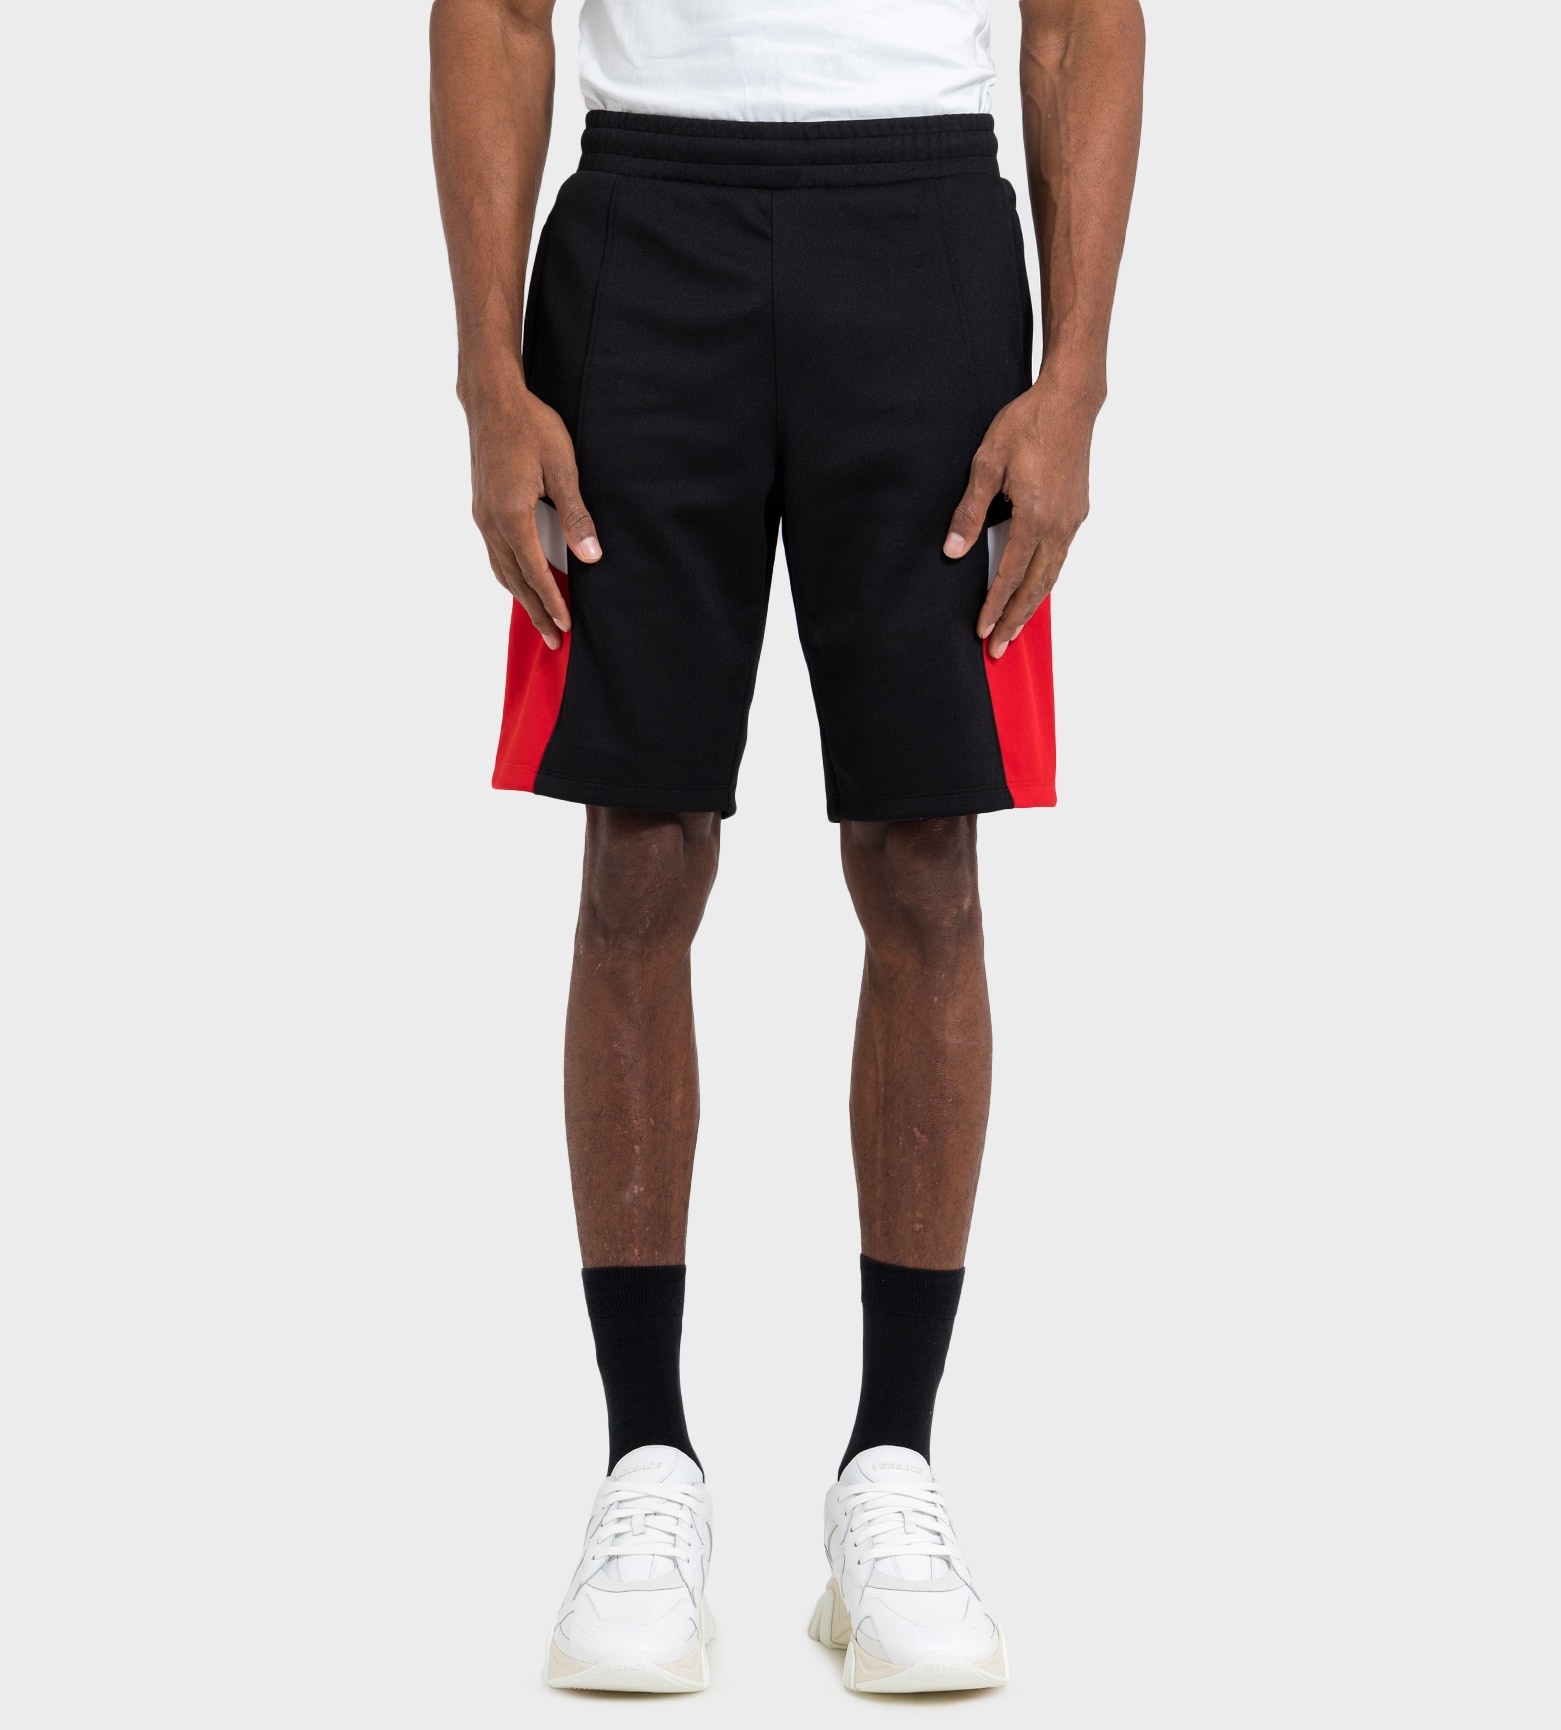 Givenchy Shorts Online, 59% OFF | www.propellermadrid.com